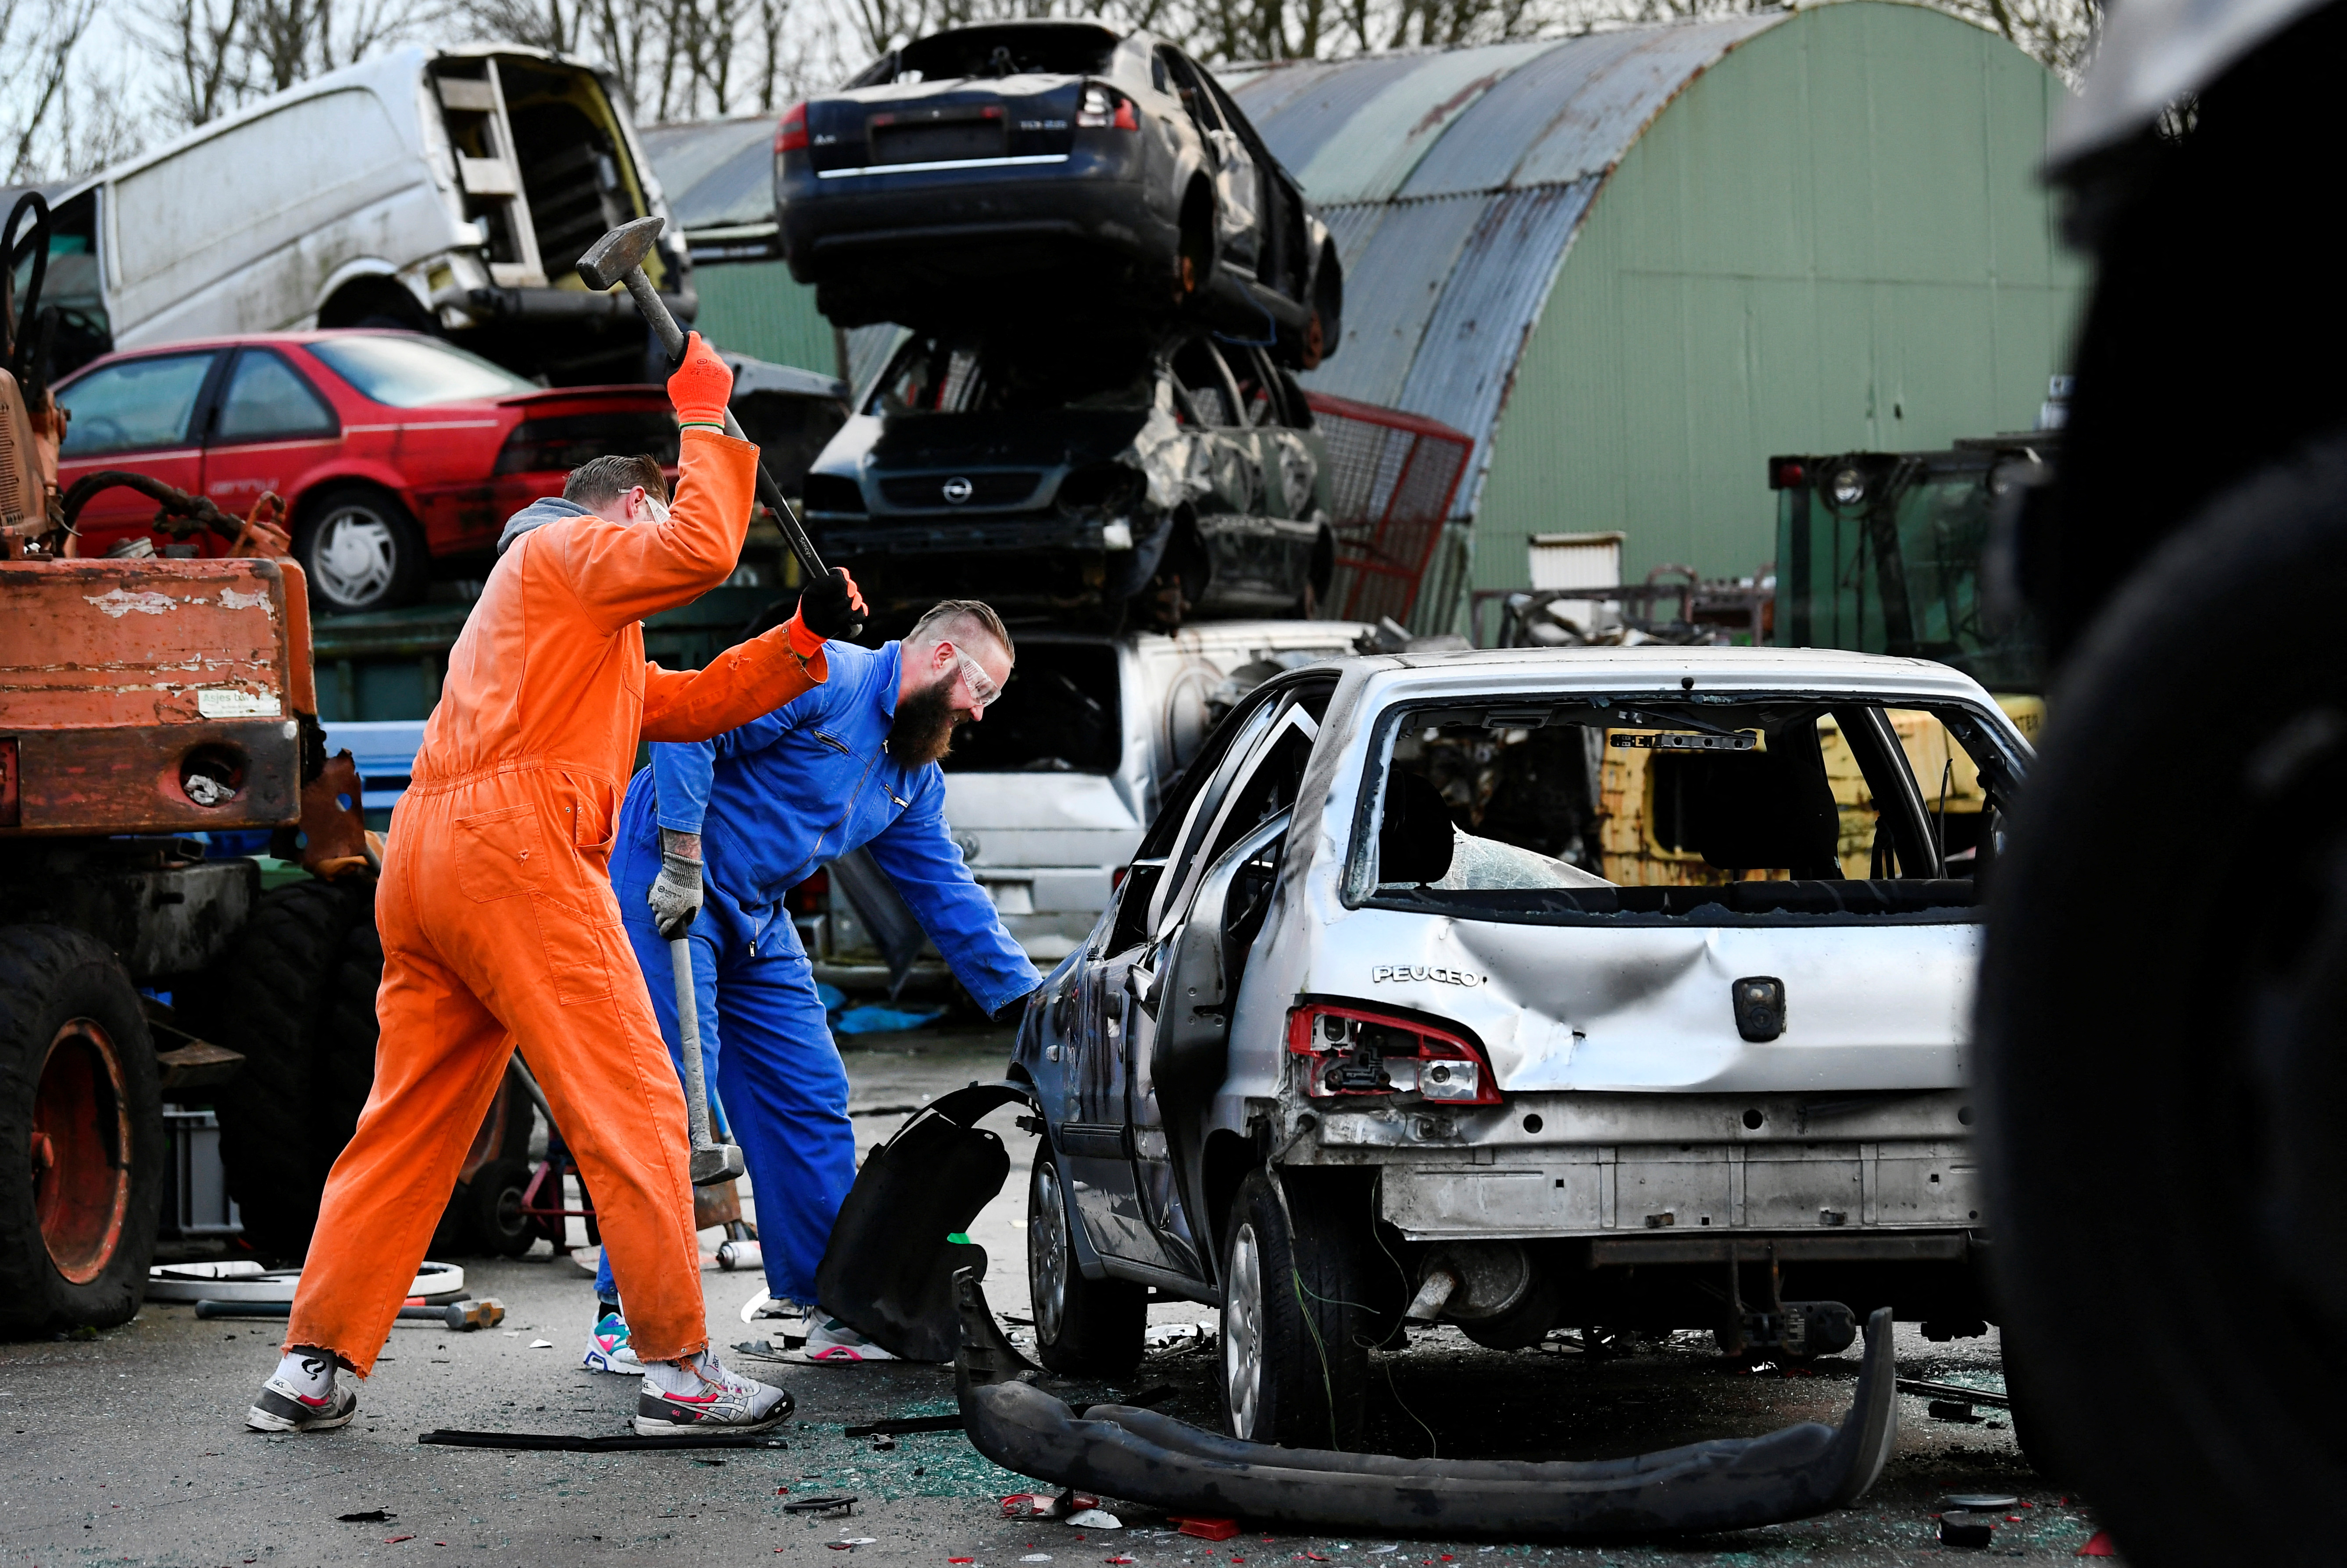 Twin brothers Steven and Brian Krijger use hammers to scrap a car to express their frustration as the Netherlands undergoes another lockdown